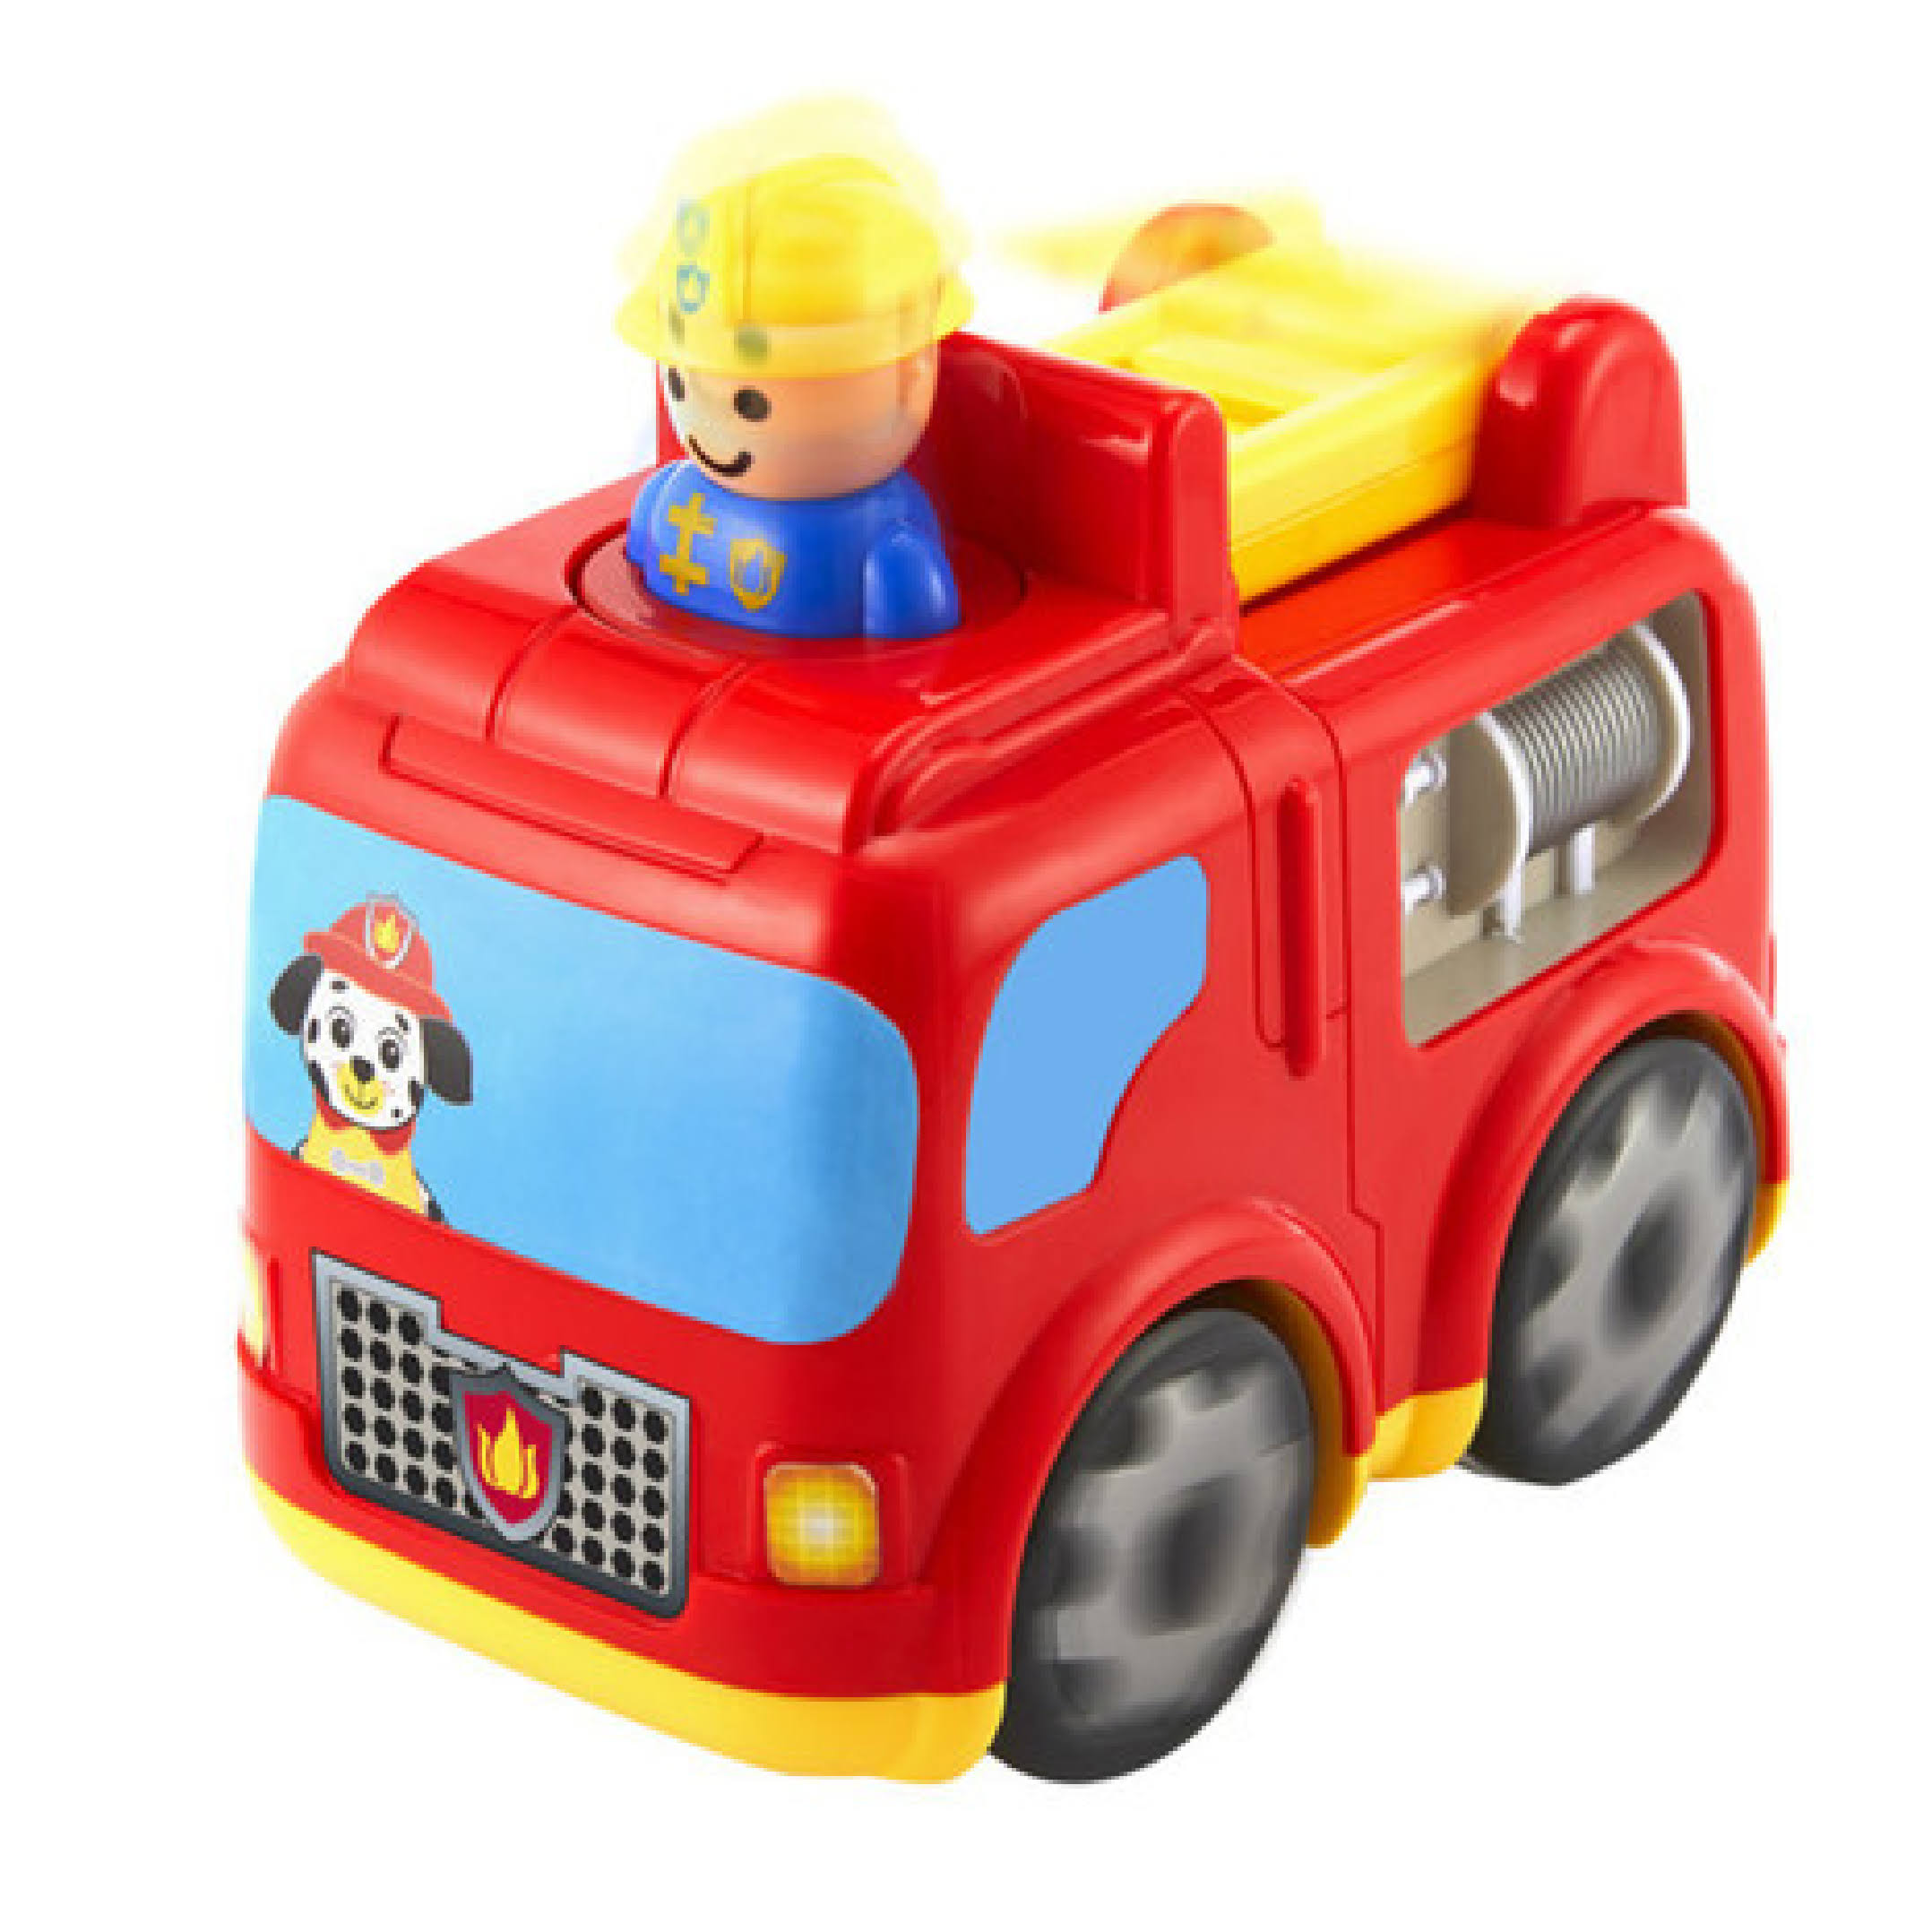 Kidoozie Press N Zoom Fire Engine - Developmental Activity Toy for Tod